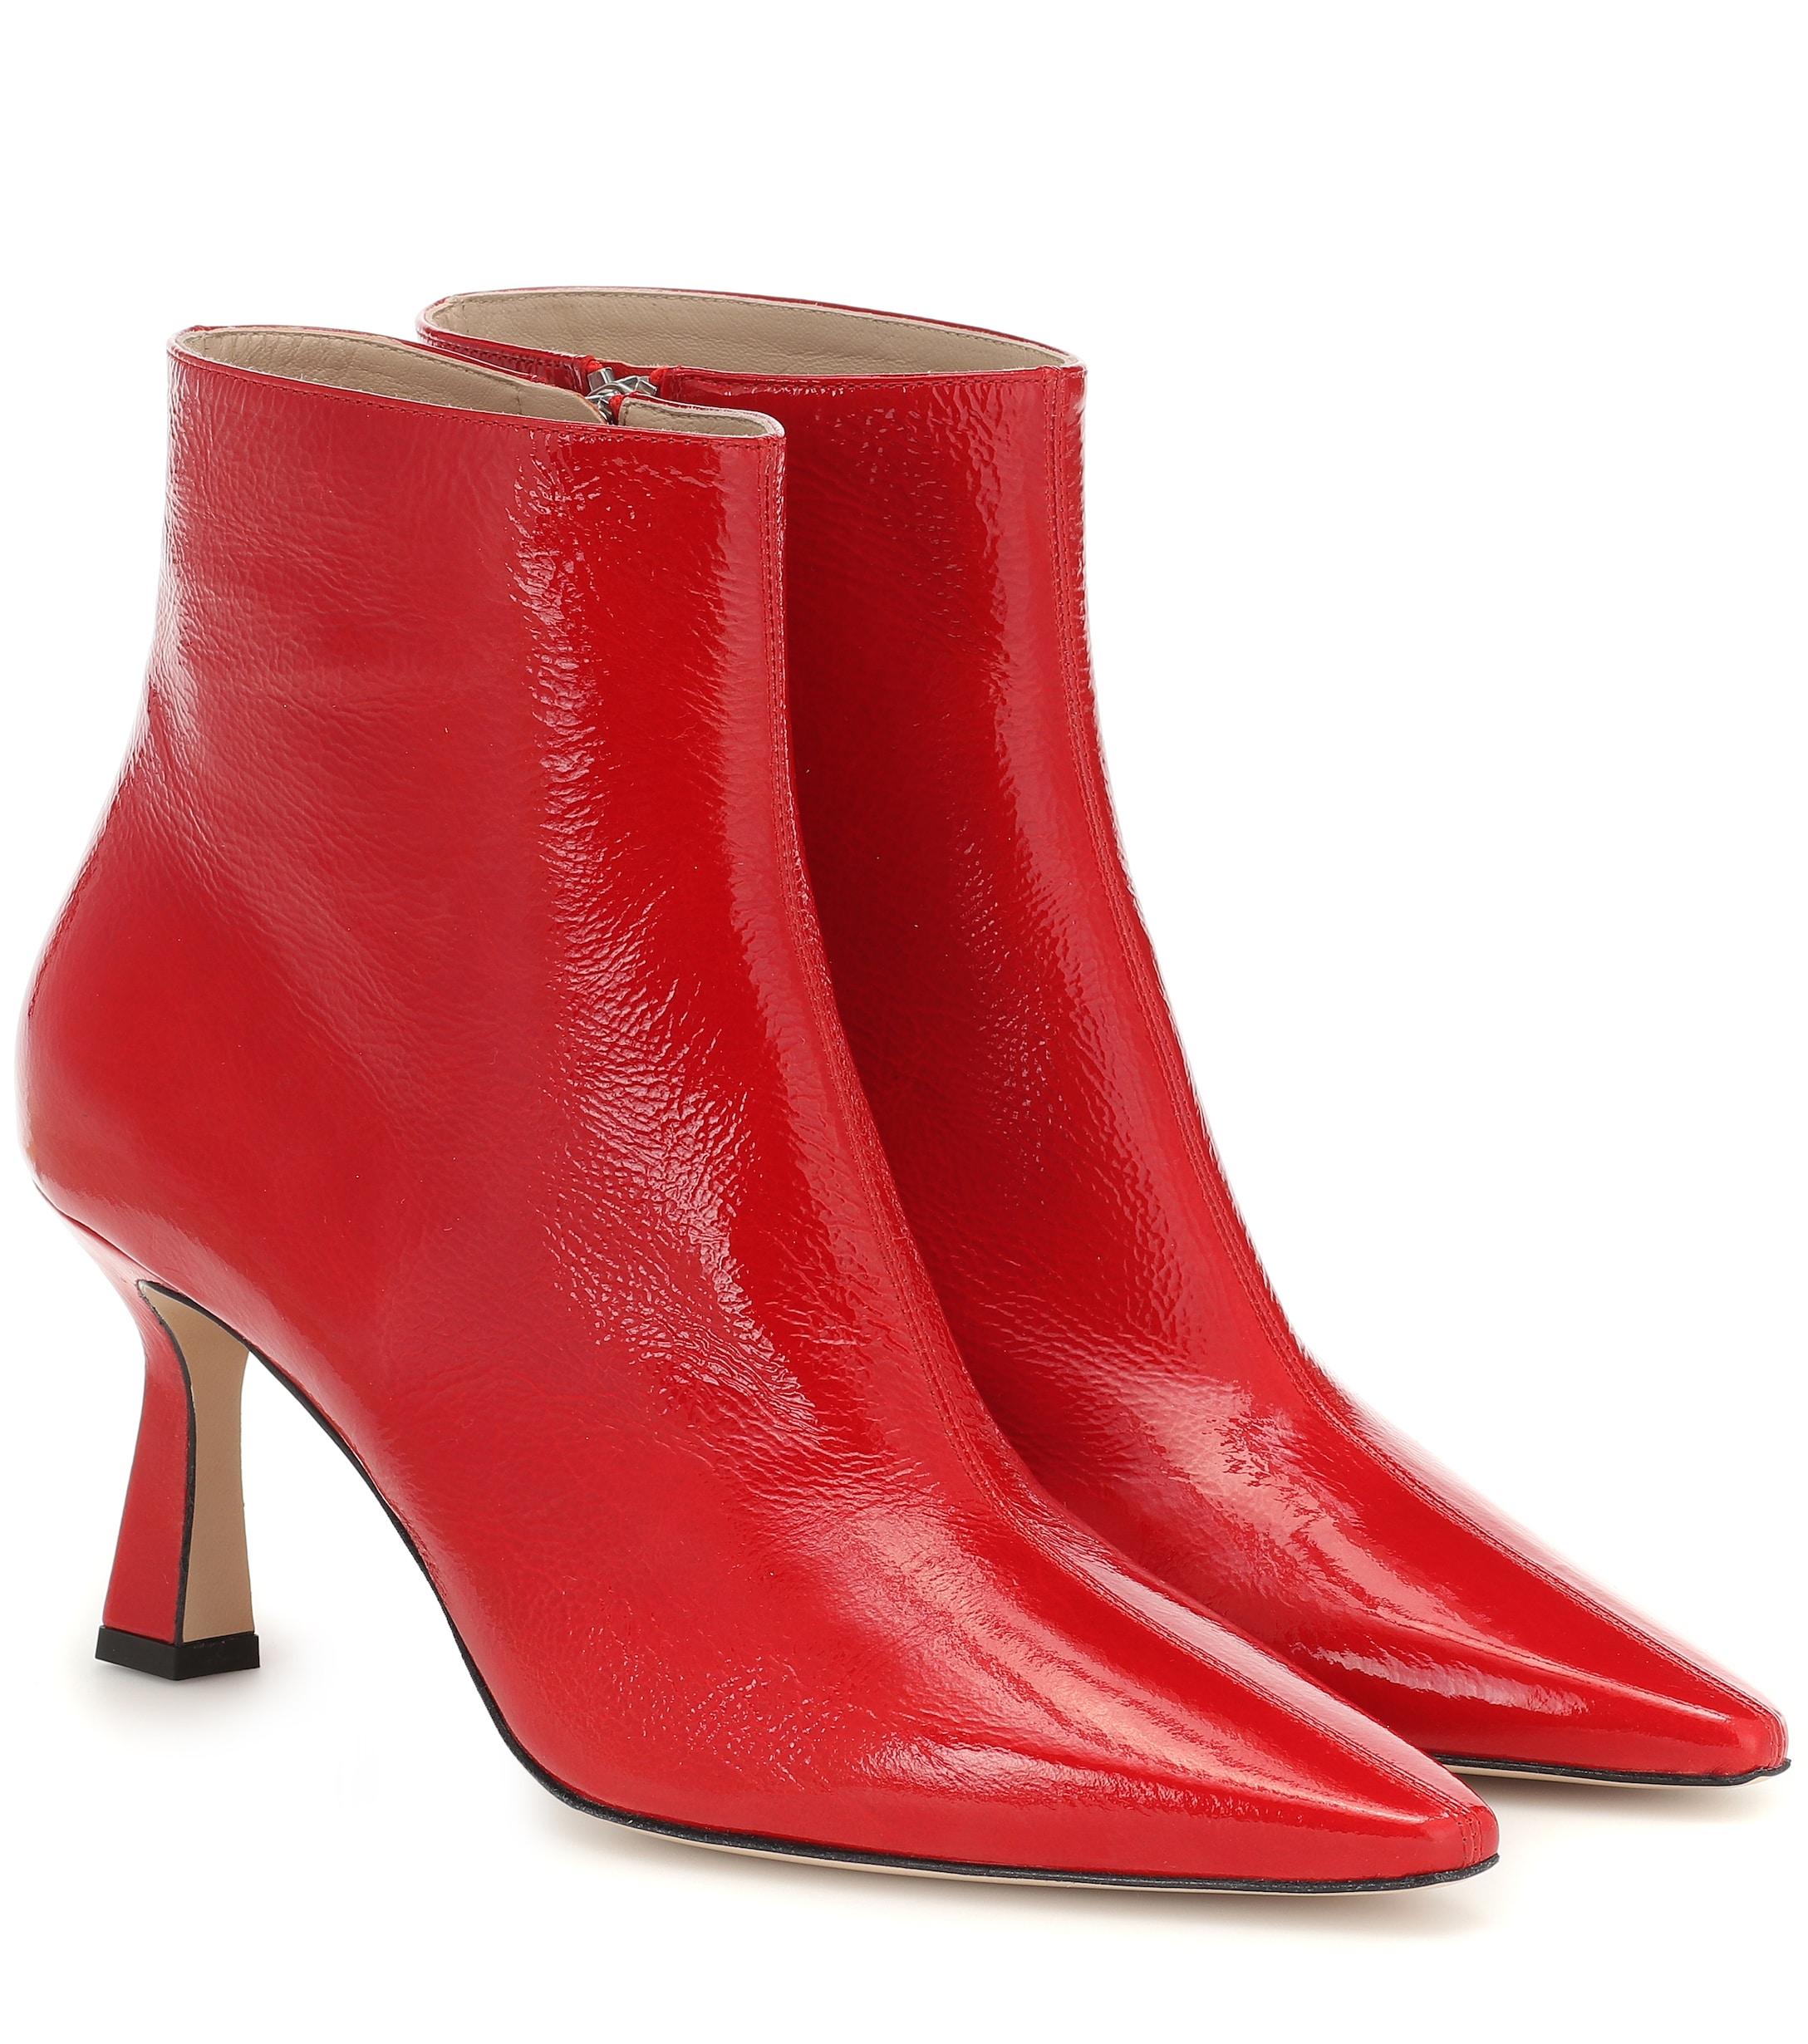 Wandler Lina Leather Ankle Boots in Red - Lyst